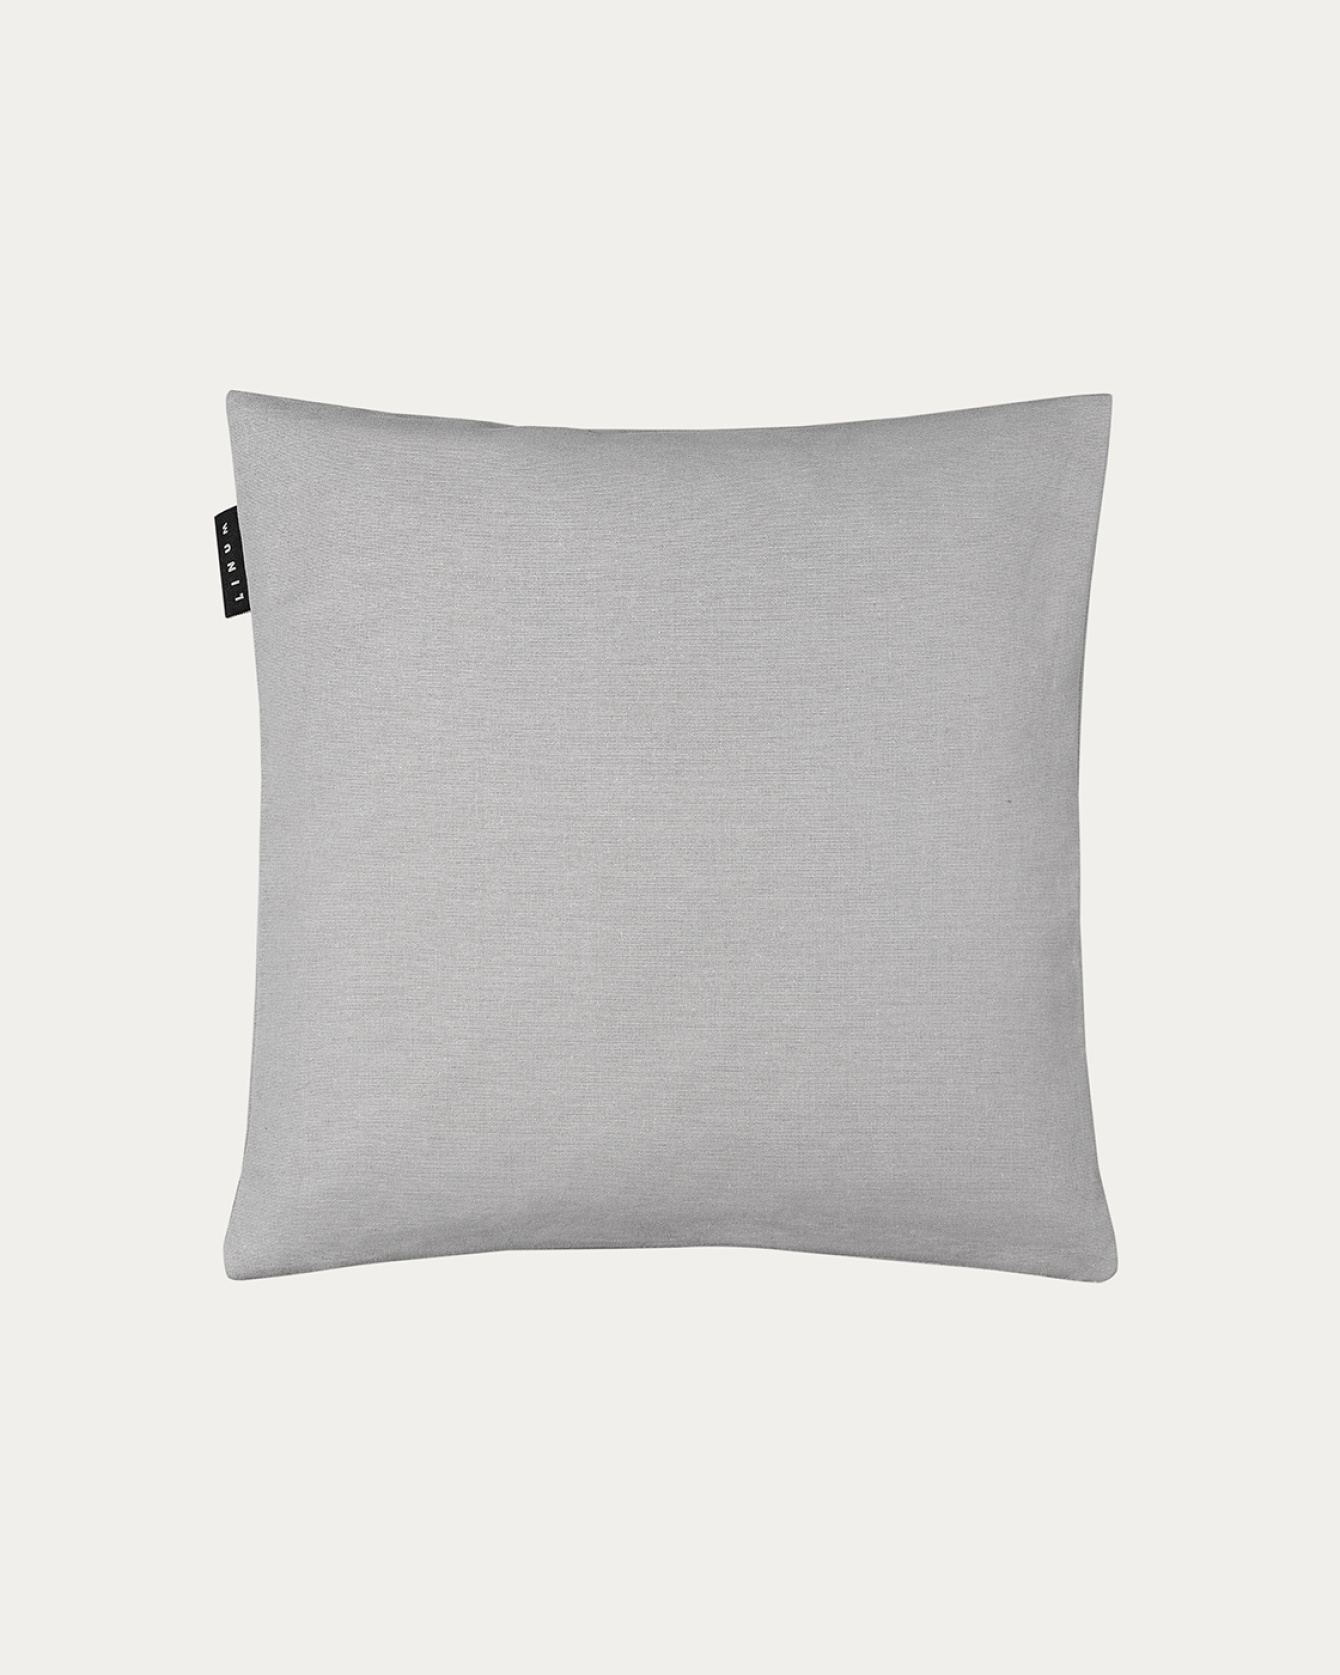 Product image light grey ANNABELL cushion cover made of soft cotton from LINUM DESIGN. Size 40x40 cm.